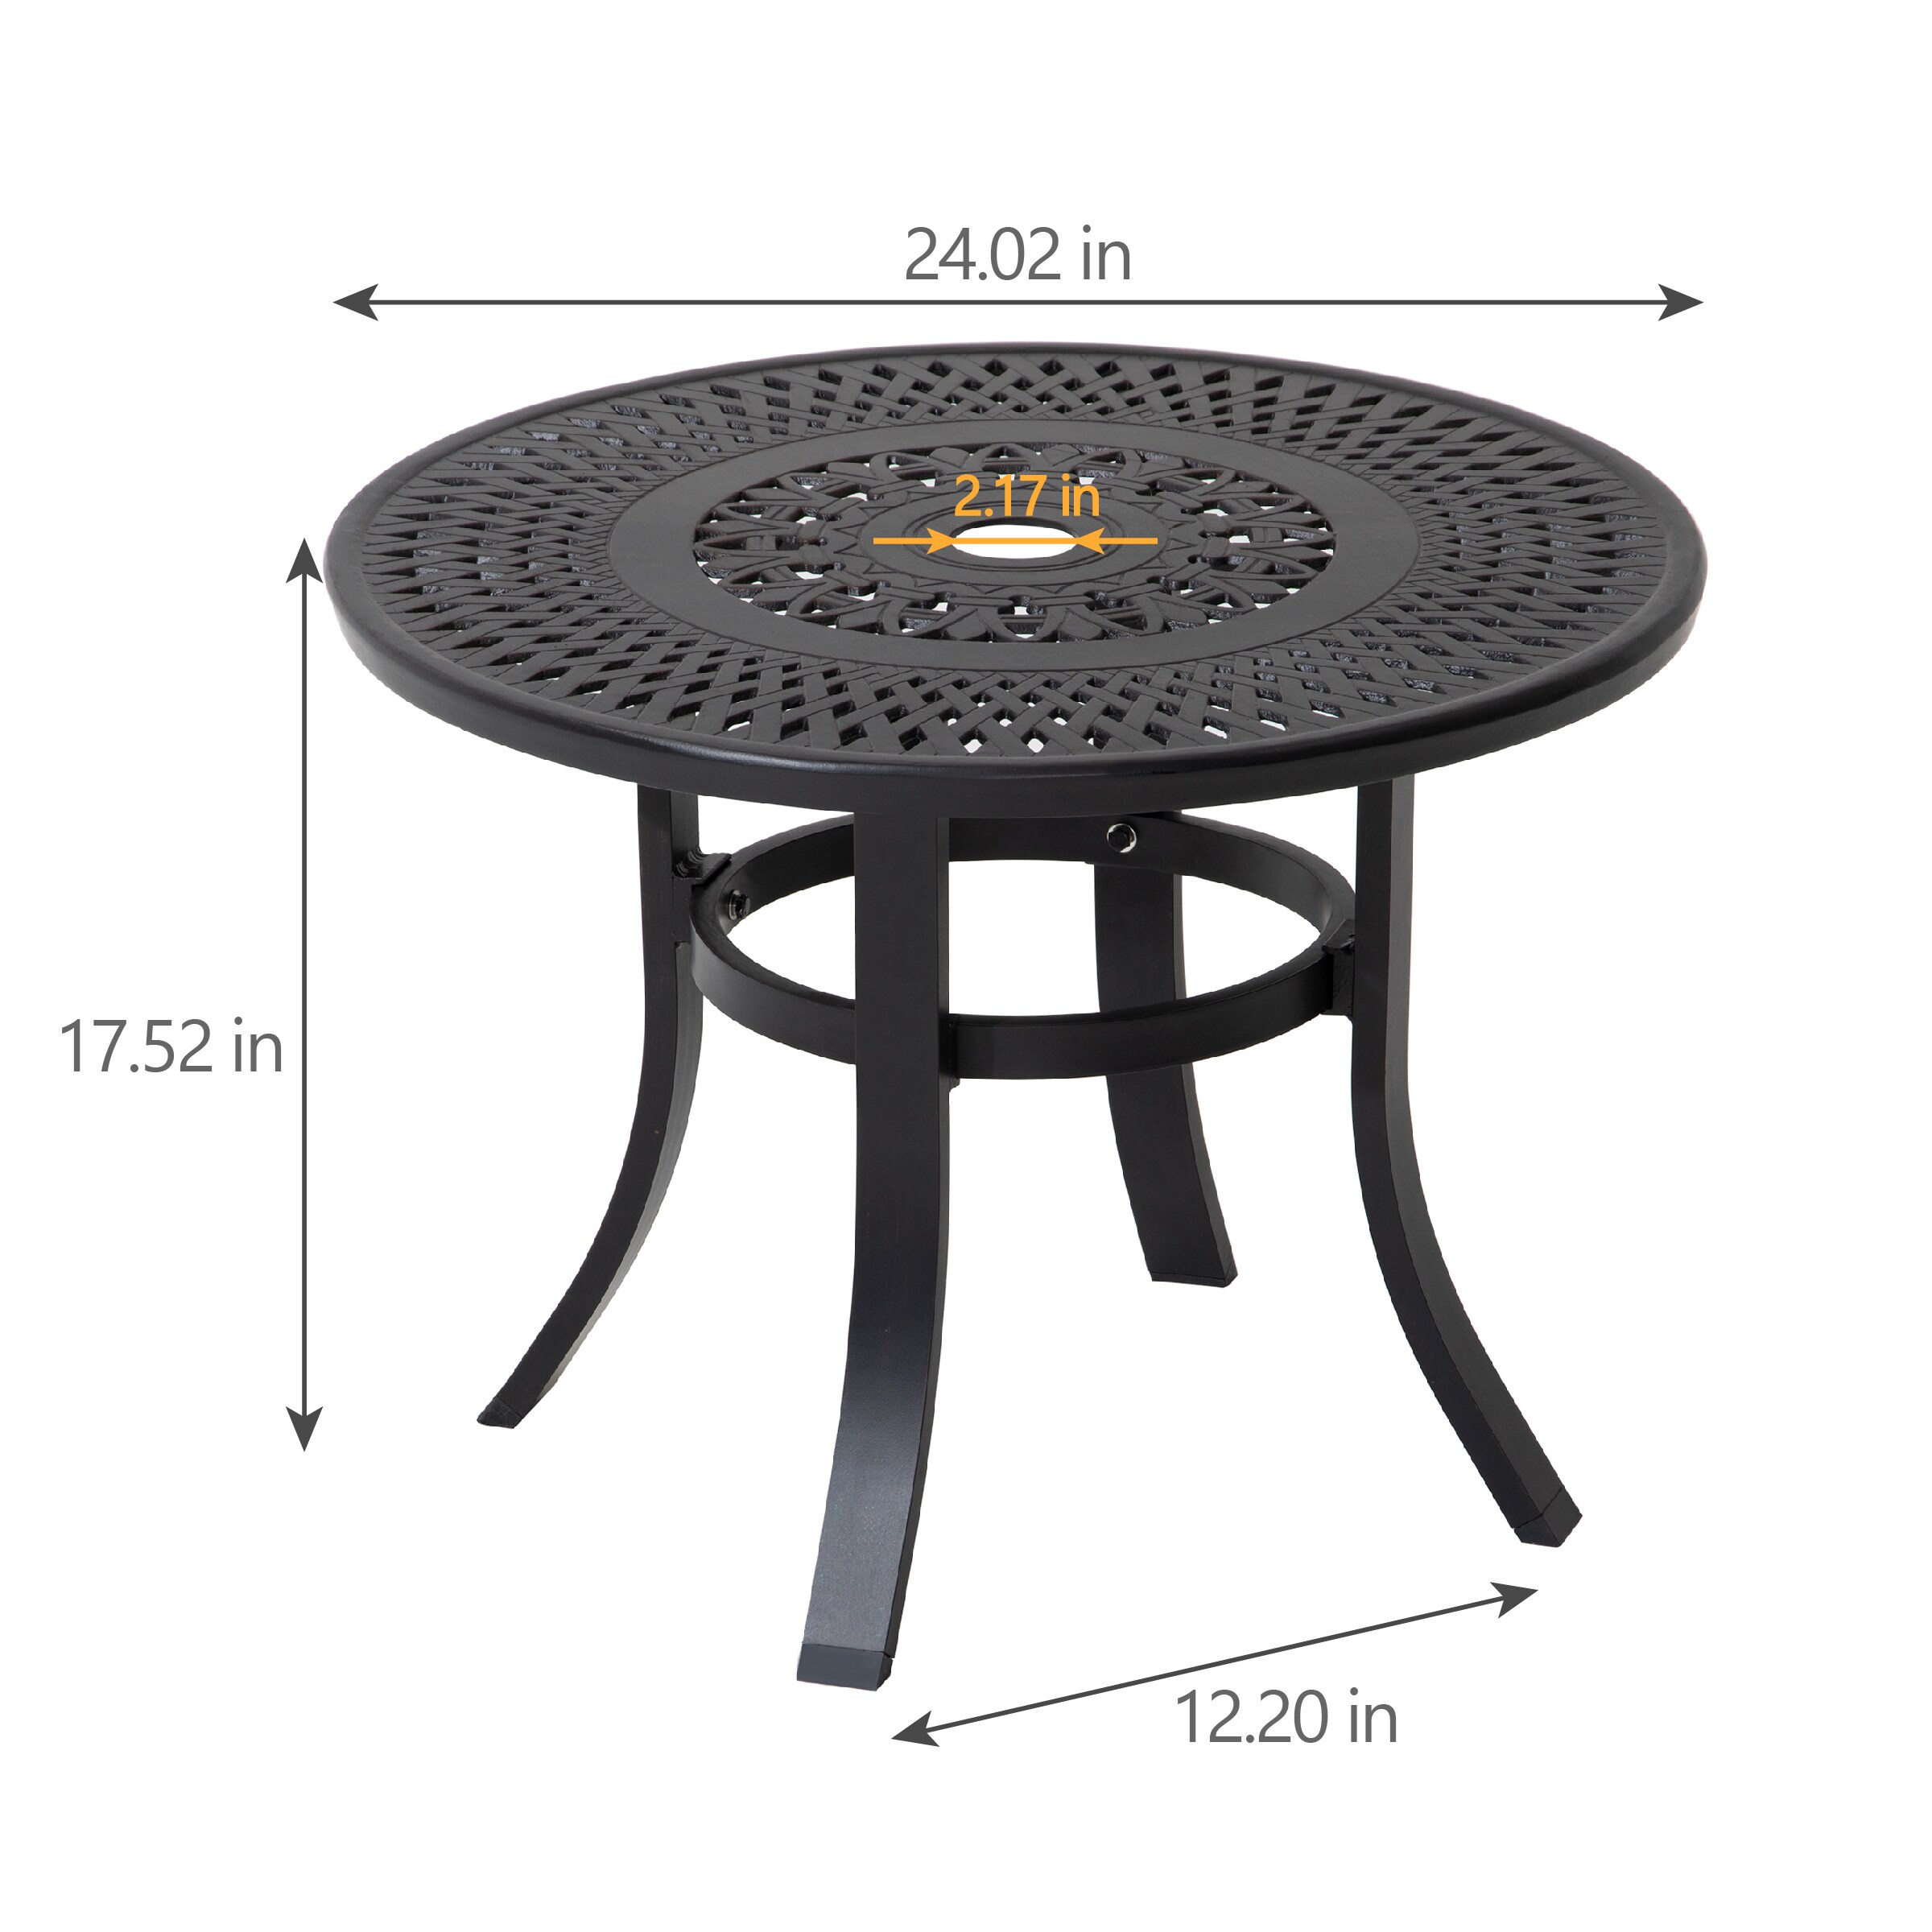 Details about   Wicker Patio Table Outdoor Square Coffee Table Wicker Rattan End Table 